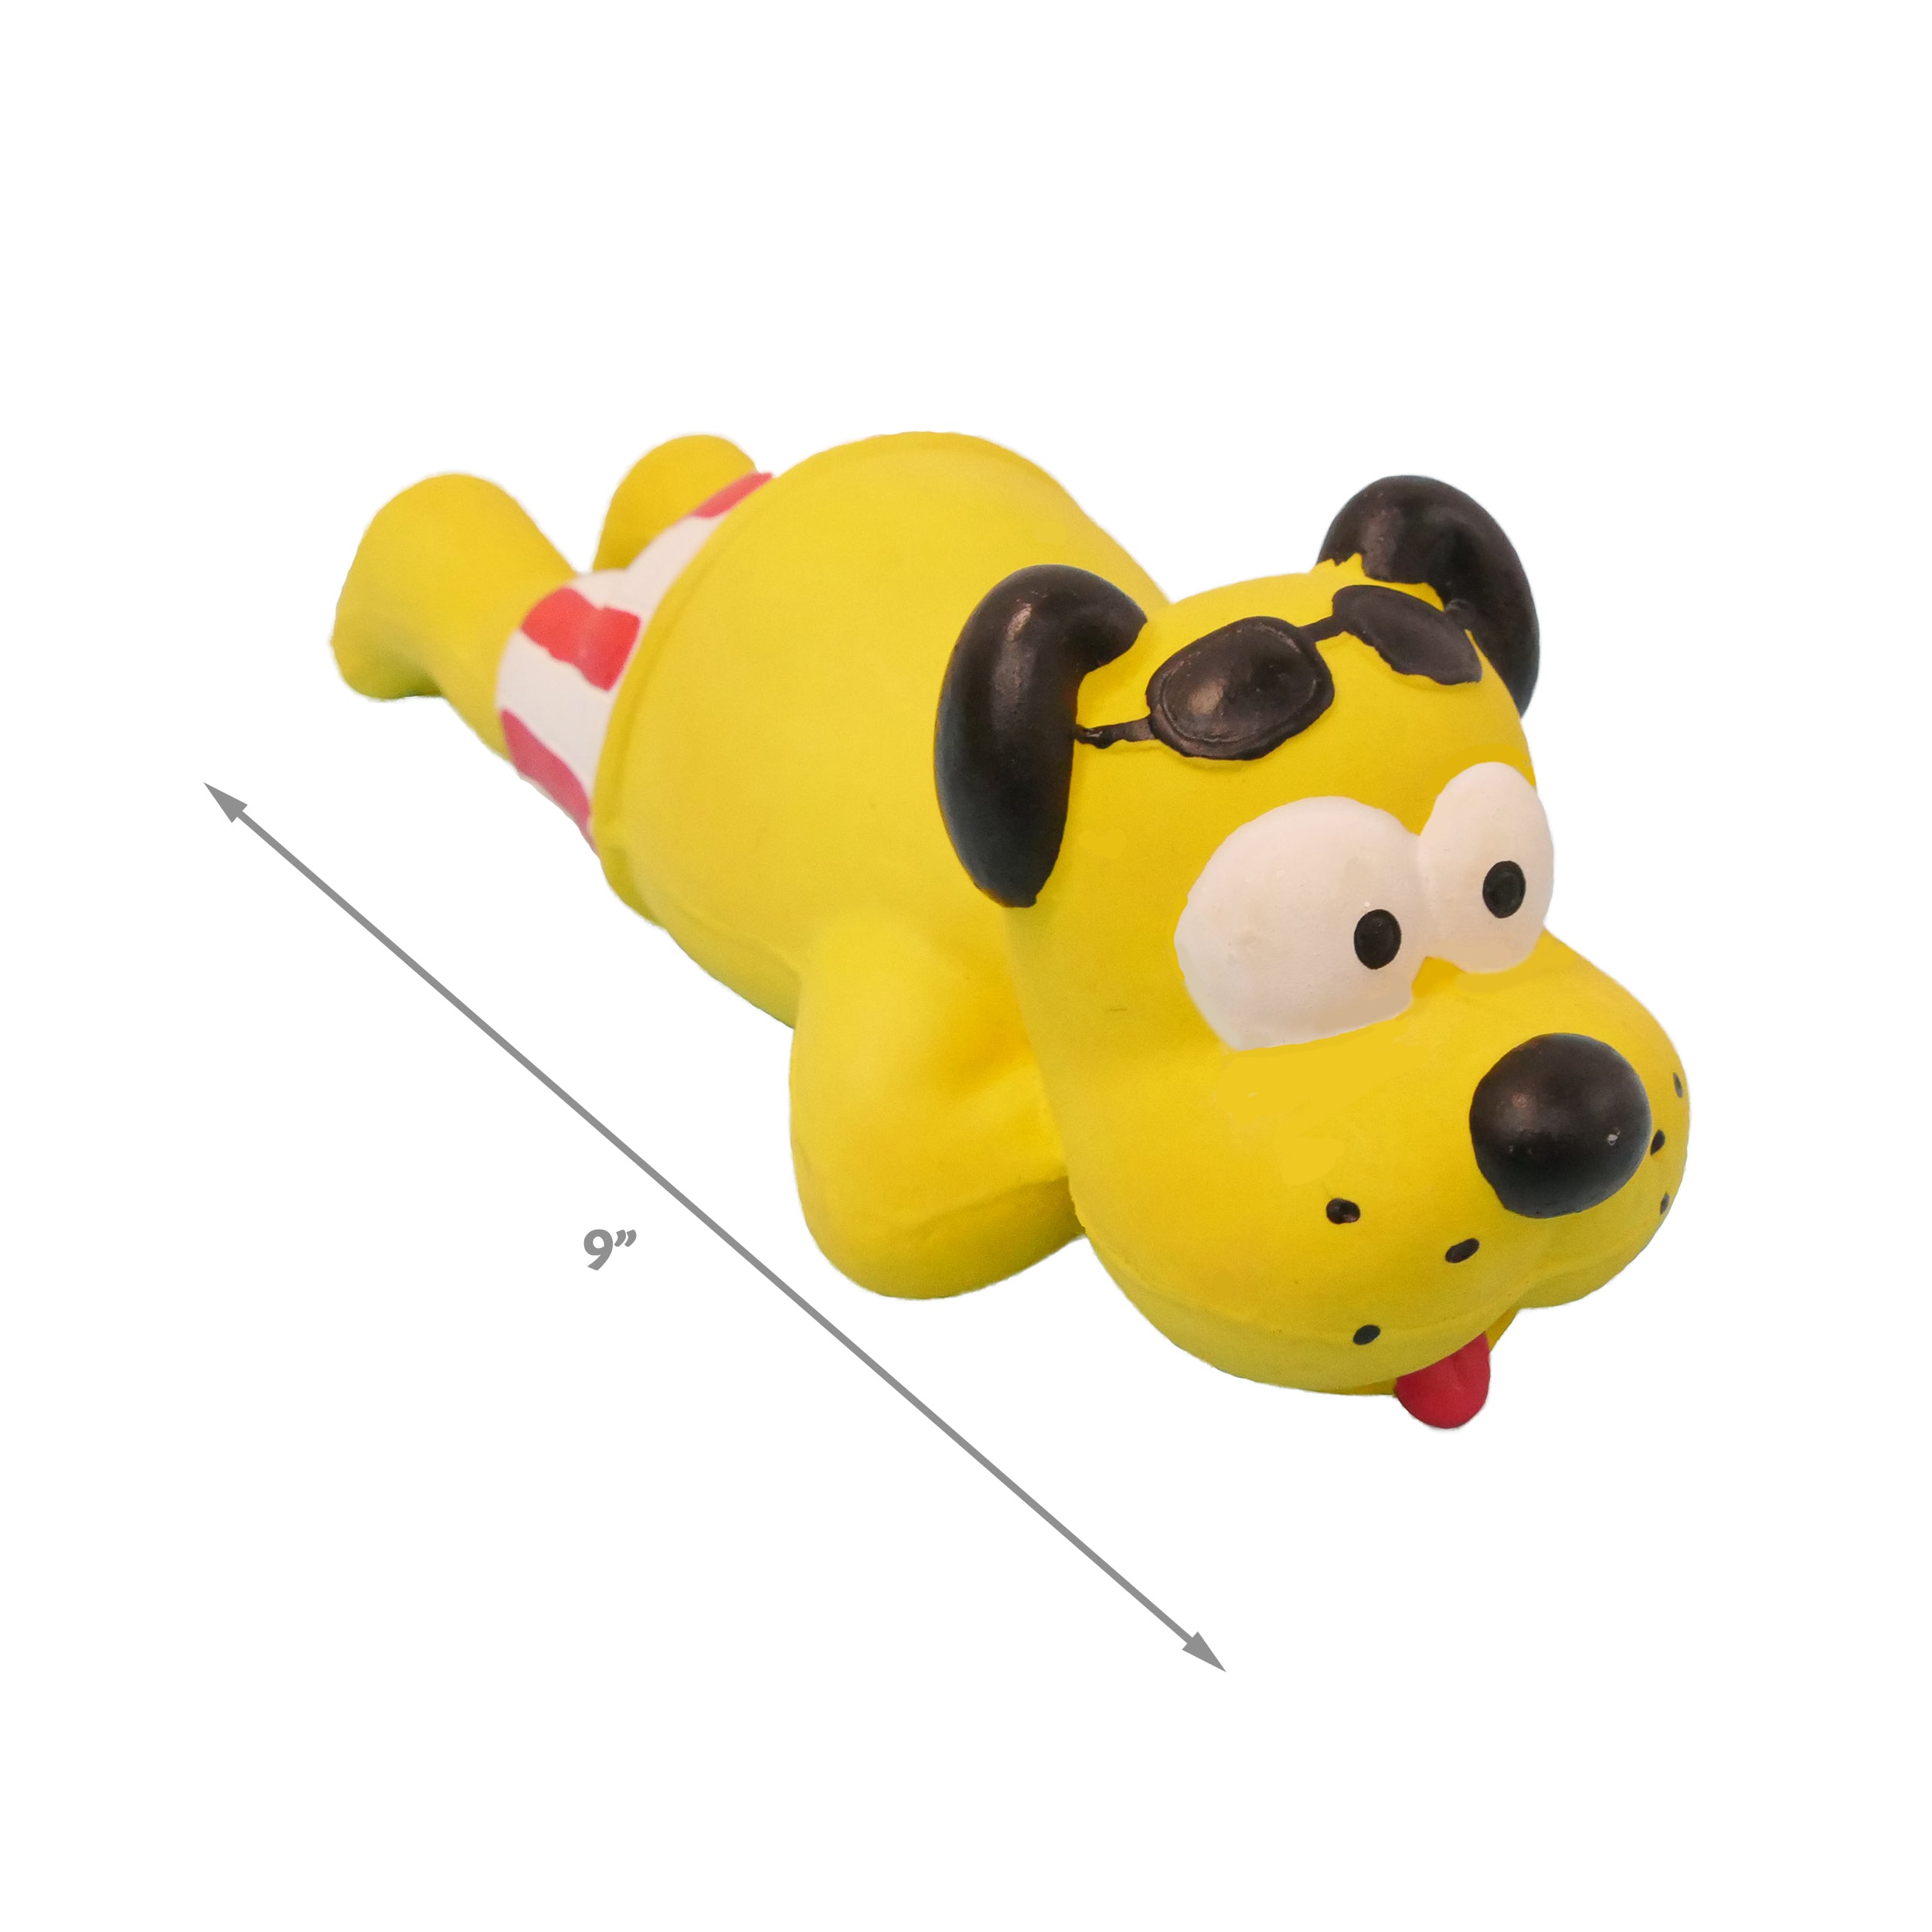 [Dog toy] yellow rubber dog toy in swim trunks